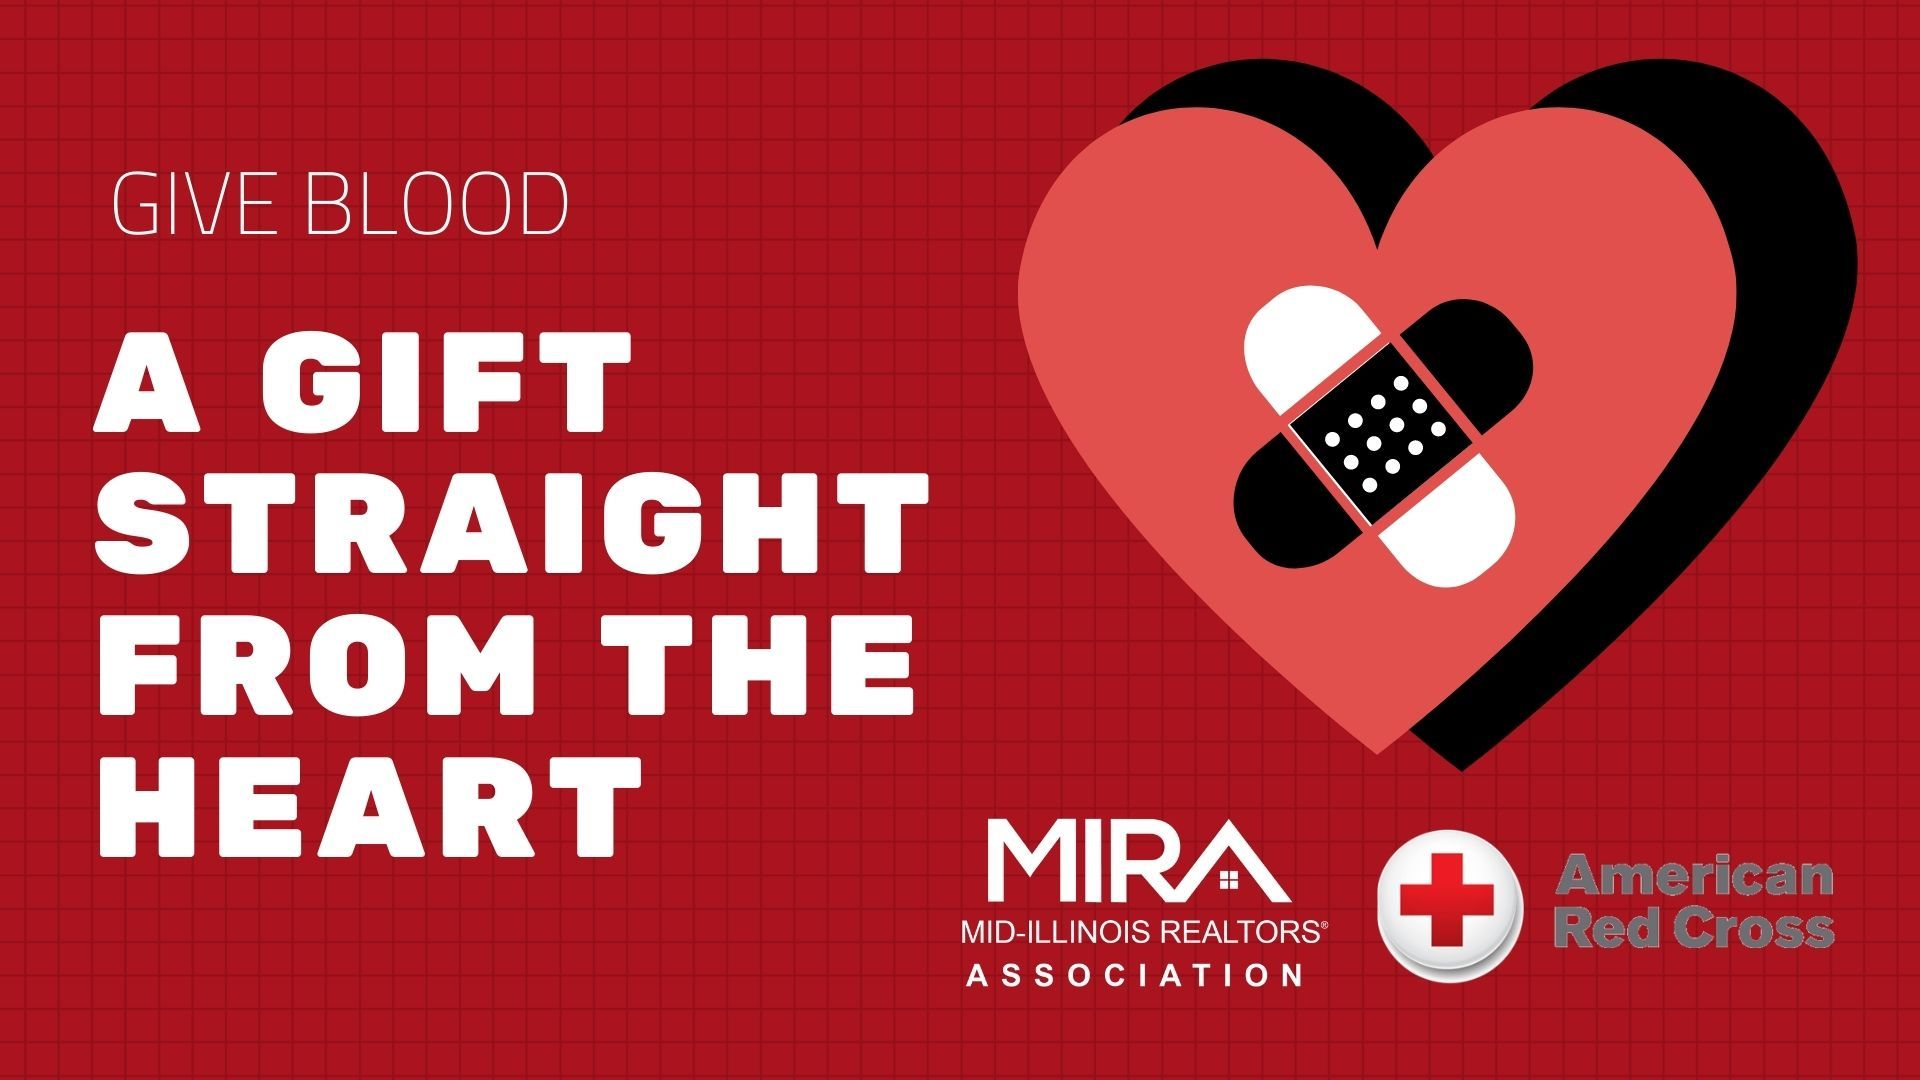 Give Blood - a gift straight from the heart